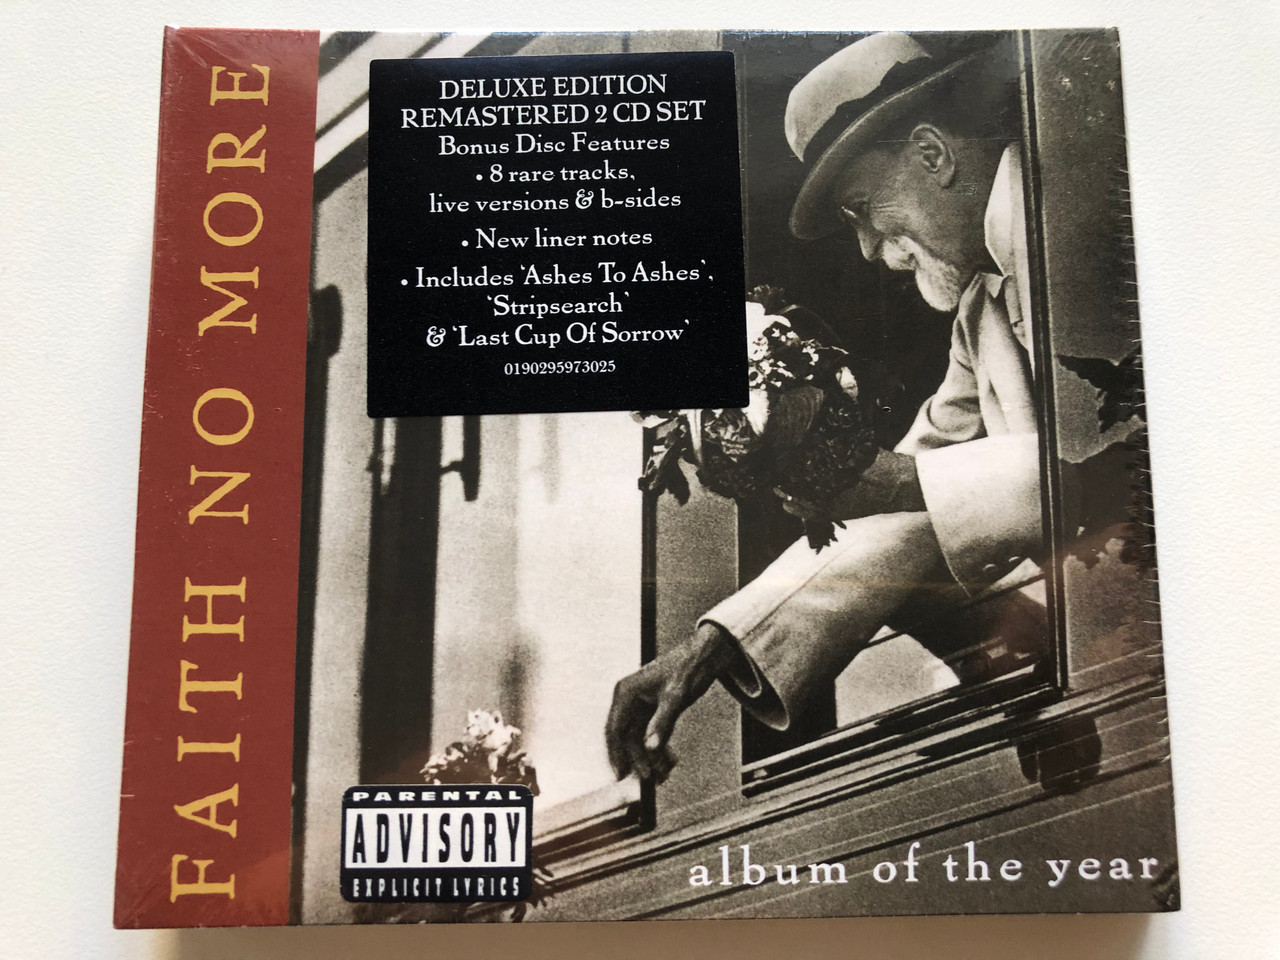 https://cdn10.bigcommerce.com/s-62bdpkt7pb/products/0/images/212963/Faith_No_More_Album_Of_The_Year_Deluxe_Edition_Remastered_2_CD_Set._Bonus_Disc_Features_8_rare_tracks_live_versions_b-sides_New_liner_notes_Includes_Ashes_To_Ashes_Stripscarch_Sl_1__65018.1644816861.1280.1280.JPG?c=2&_gl=1*tbrm0v*_ga*MjA2NTIxMjE2MC4xNTkwNTEyNTMy*_ga_WS2VZYPC6G*MTY0NDgxNTg1OC4yODUuMS4xNjQ0ODE2NjA4LjIz